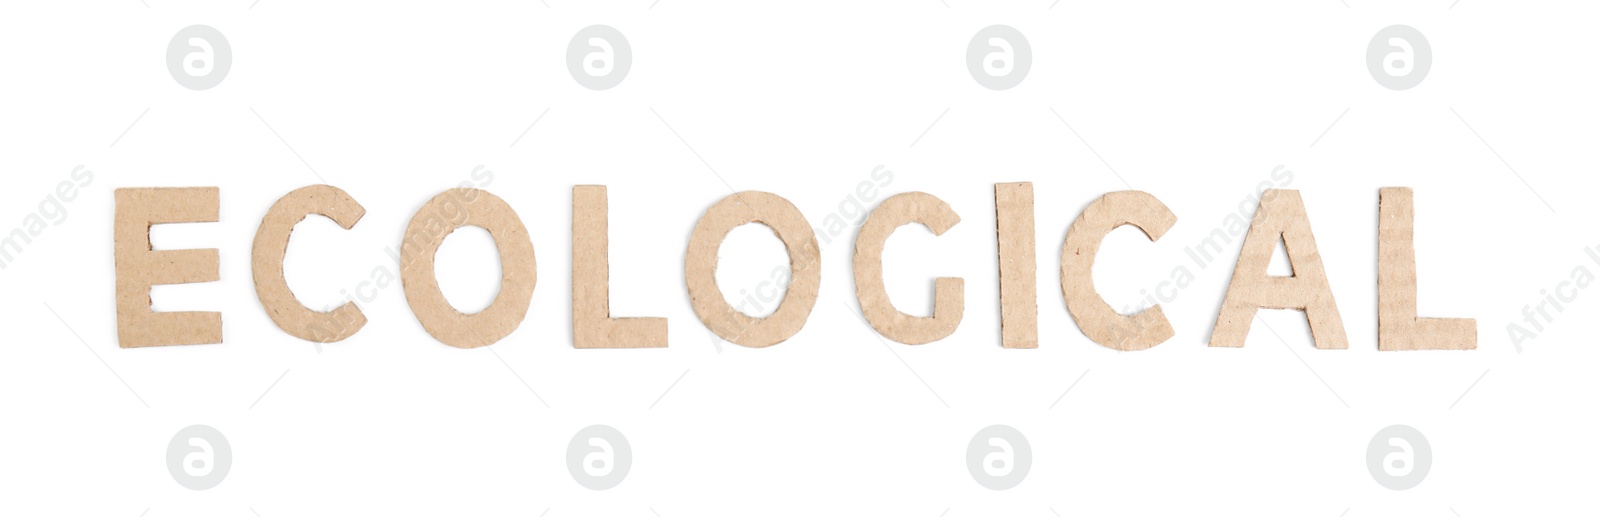 Photo of Word ECOLOGICAL made of cardboard isolated on white, top view